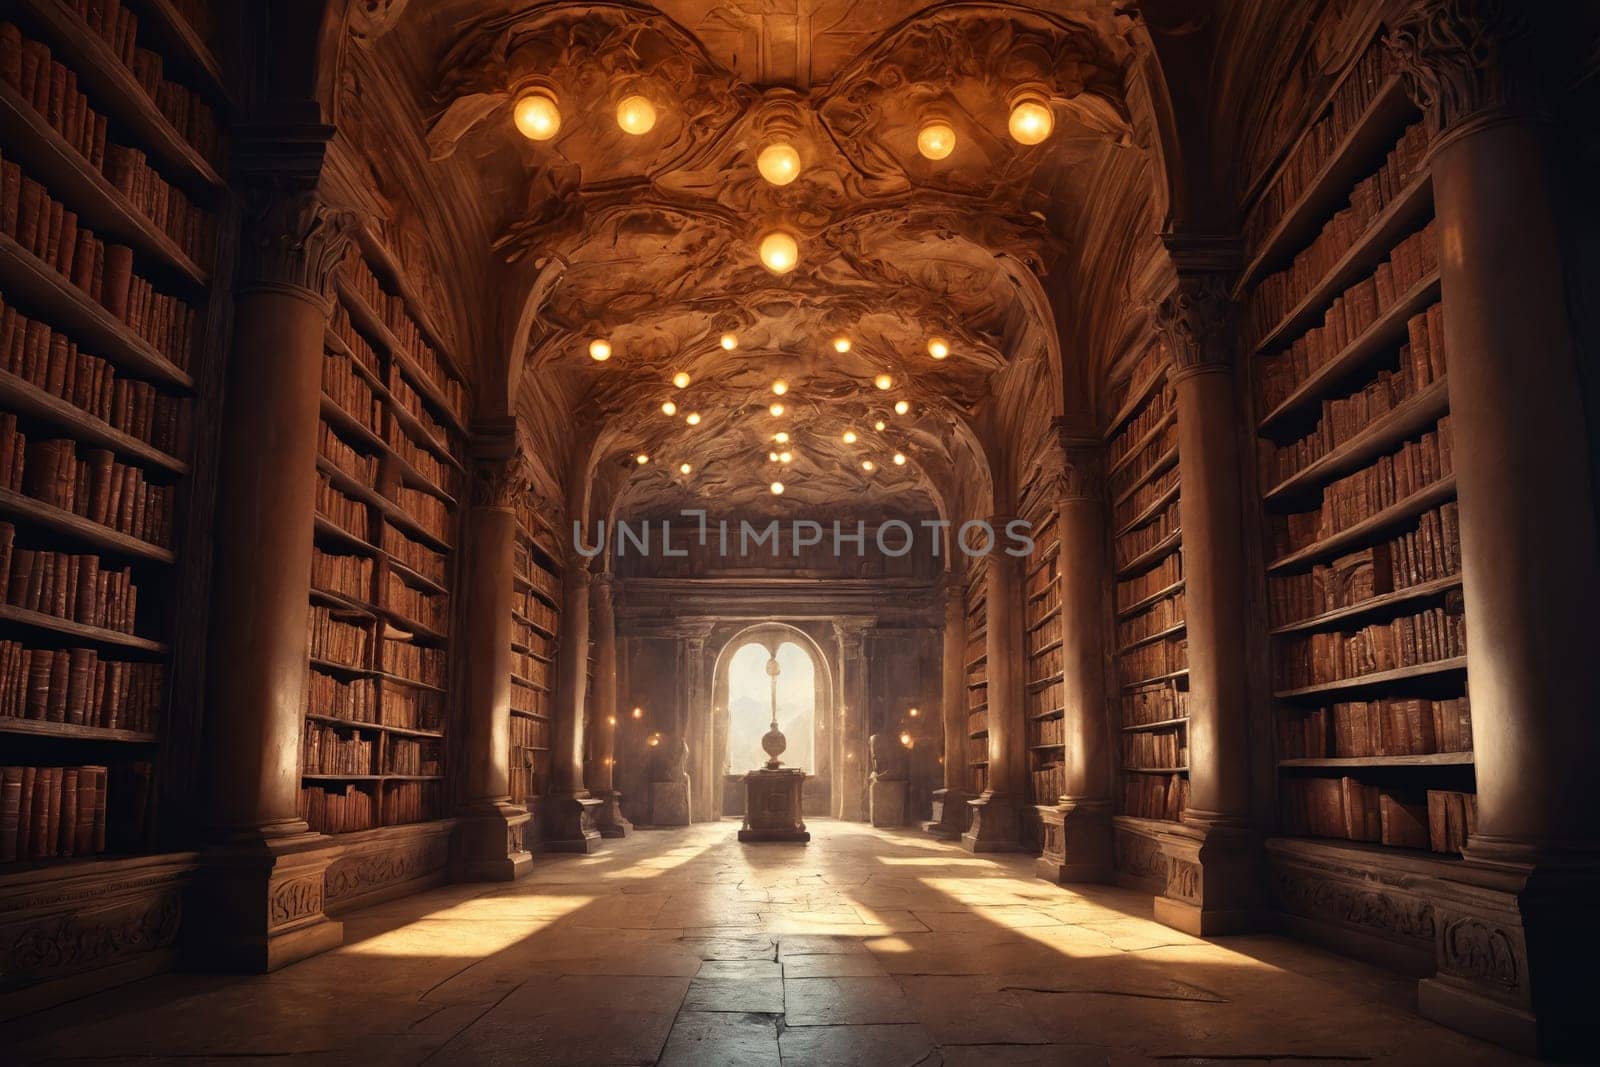 Timeless Tales Enclosed in Wood: A Historic Library Illuminated by Warm Lantern Light by Andre1ns